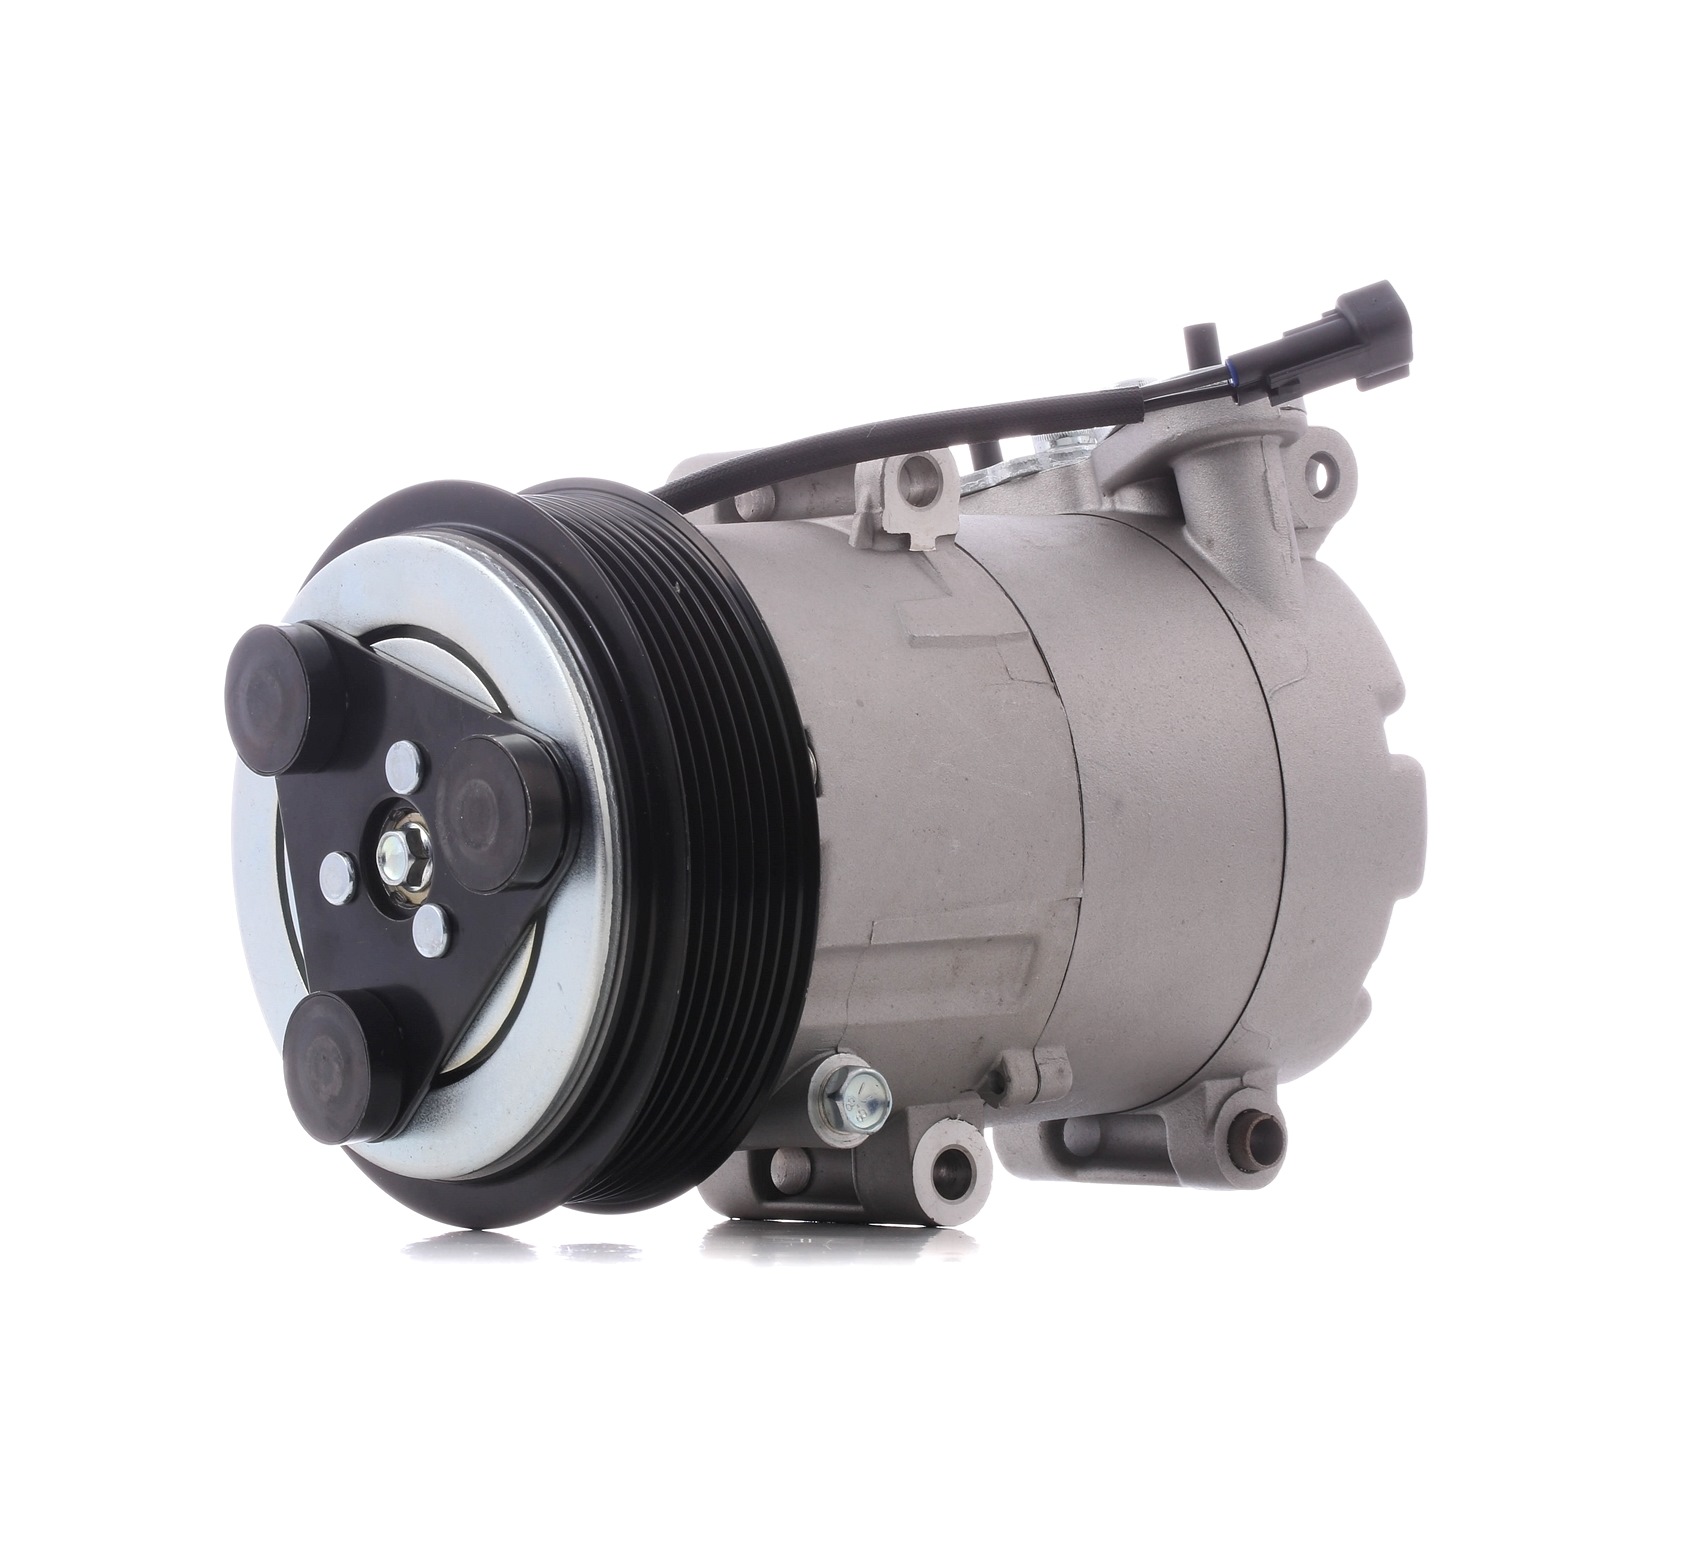 STARK SKKM-0340370 Air conditioning compressor VS16, 12V, PAG 46, with PAG compressor oil, with seal ring